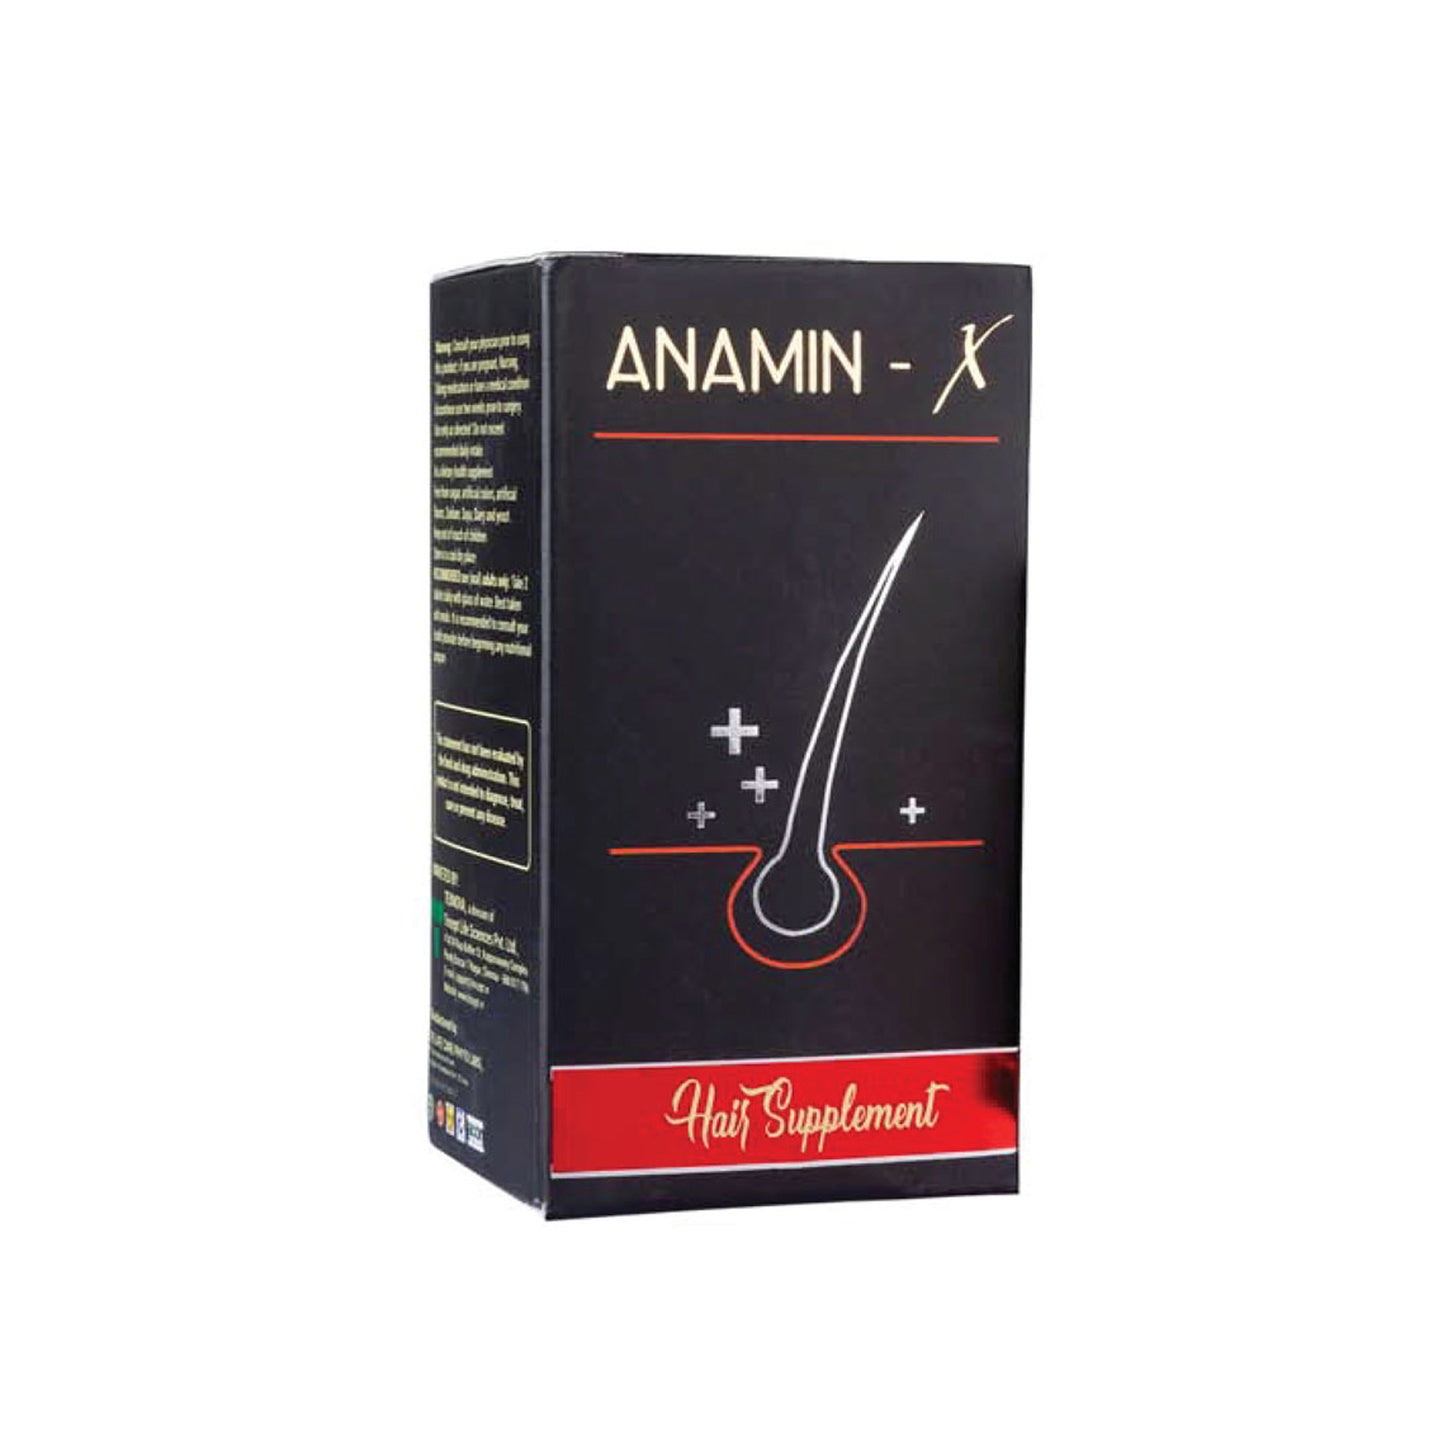 Anamin-X hair Supplement, 30 Tablets